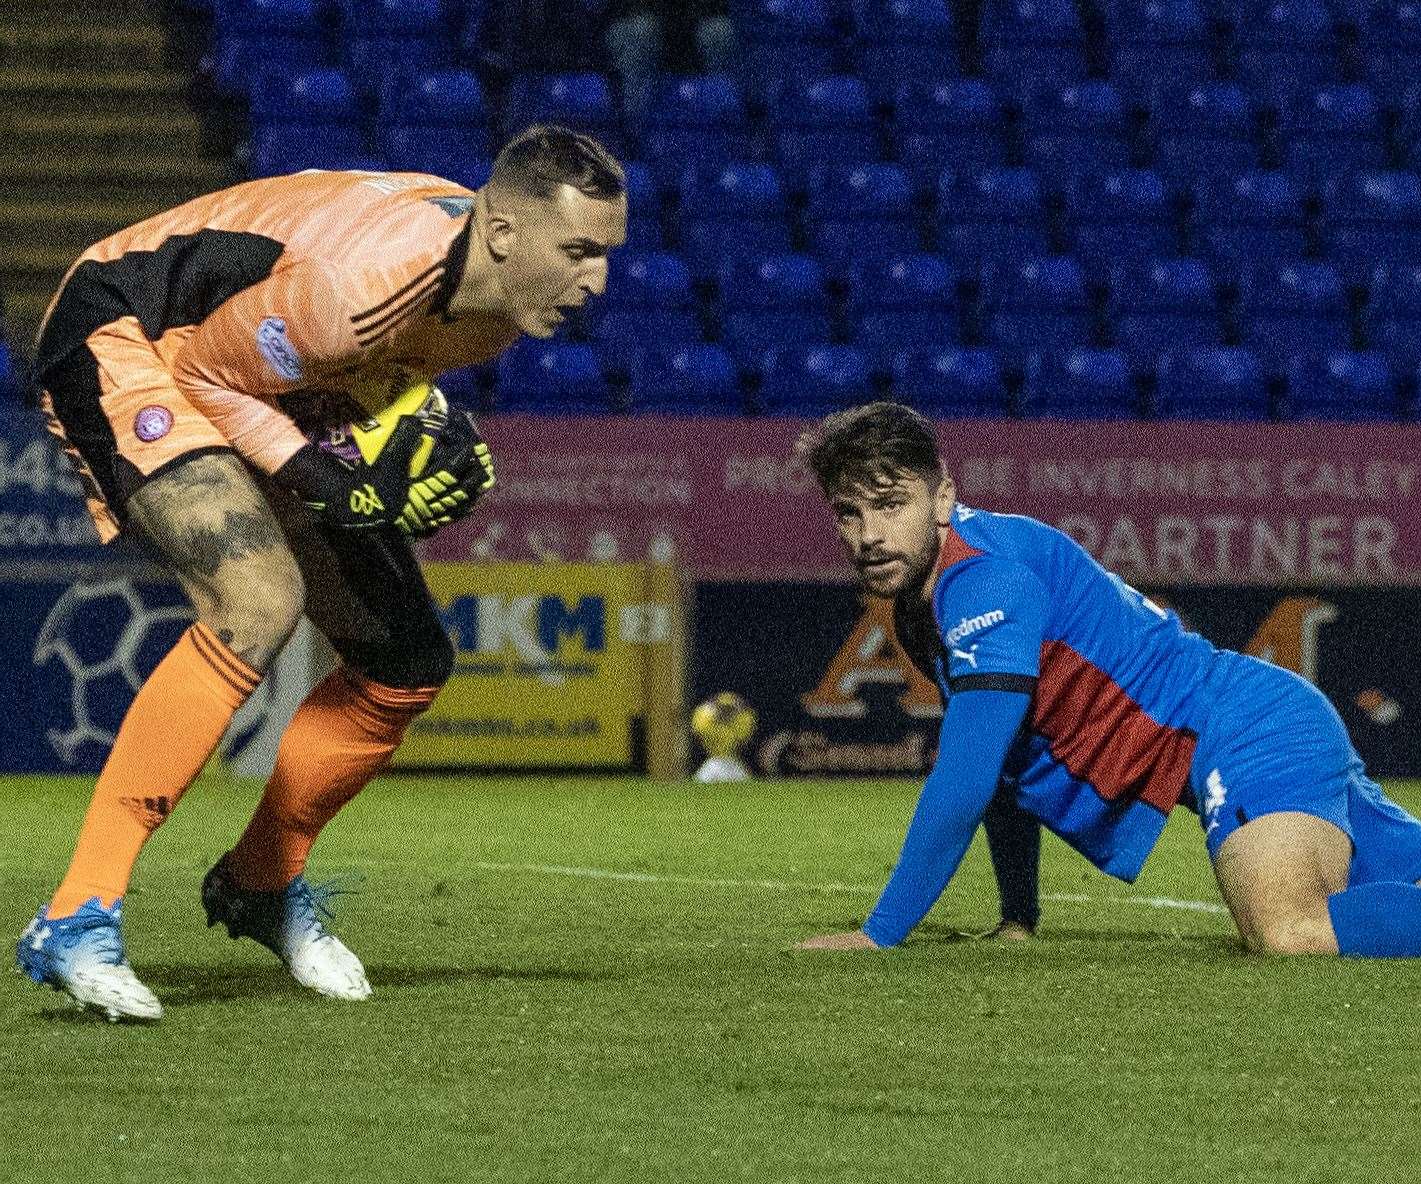 Goals were just out of reach for George Oakley and his Caley Thistle teammates against Hamilton. Picture: Ken Macpherson